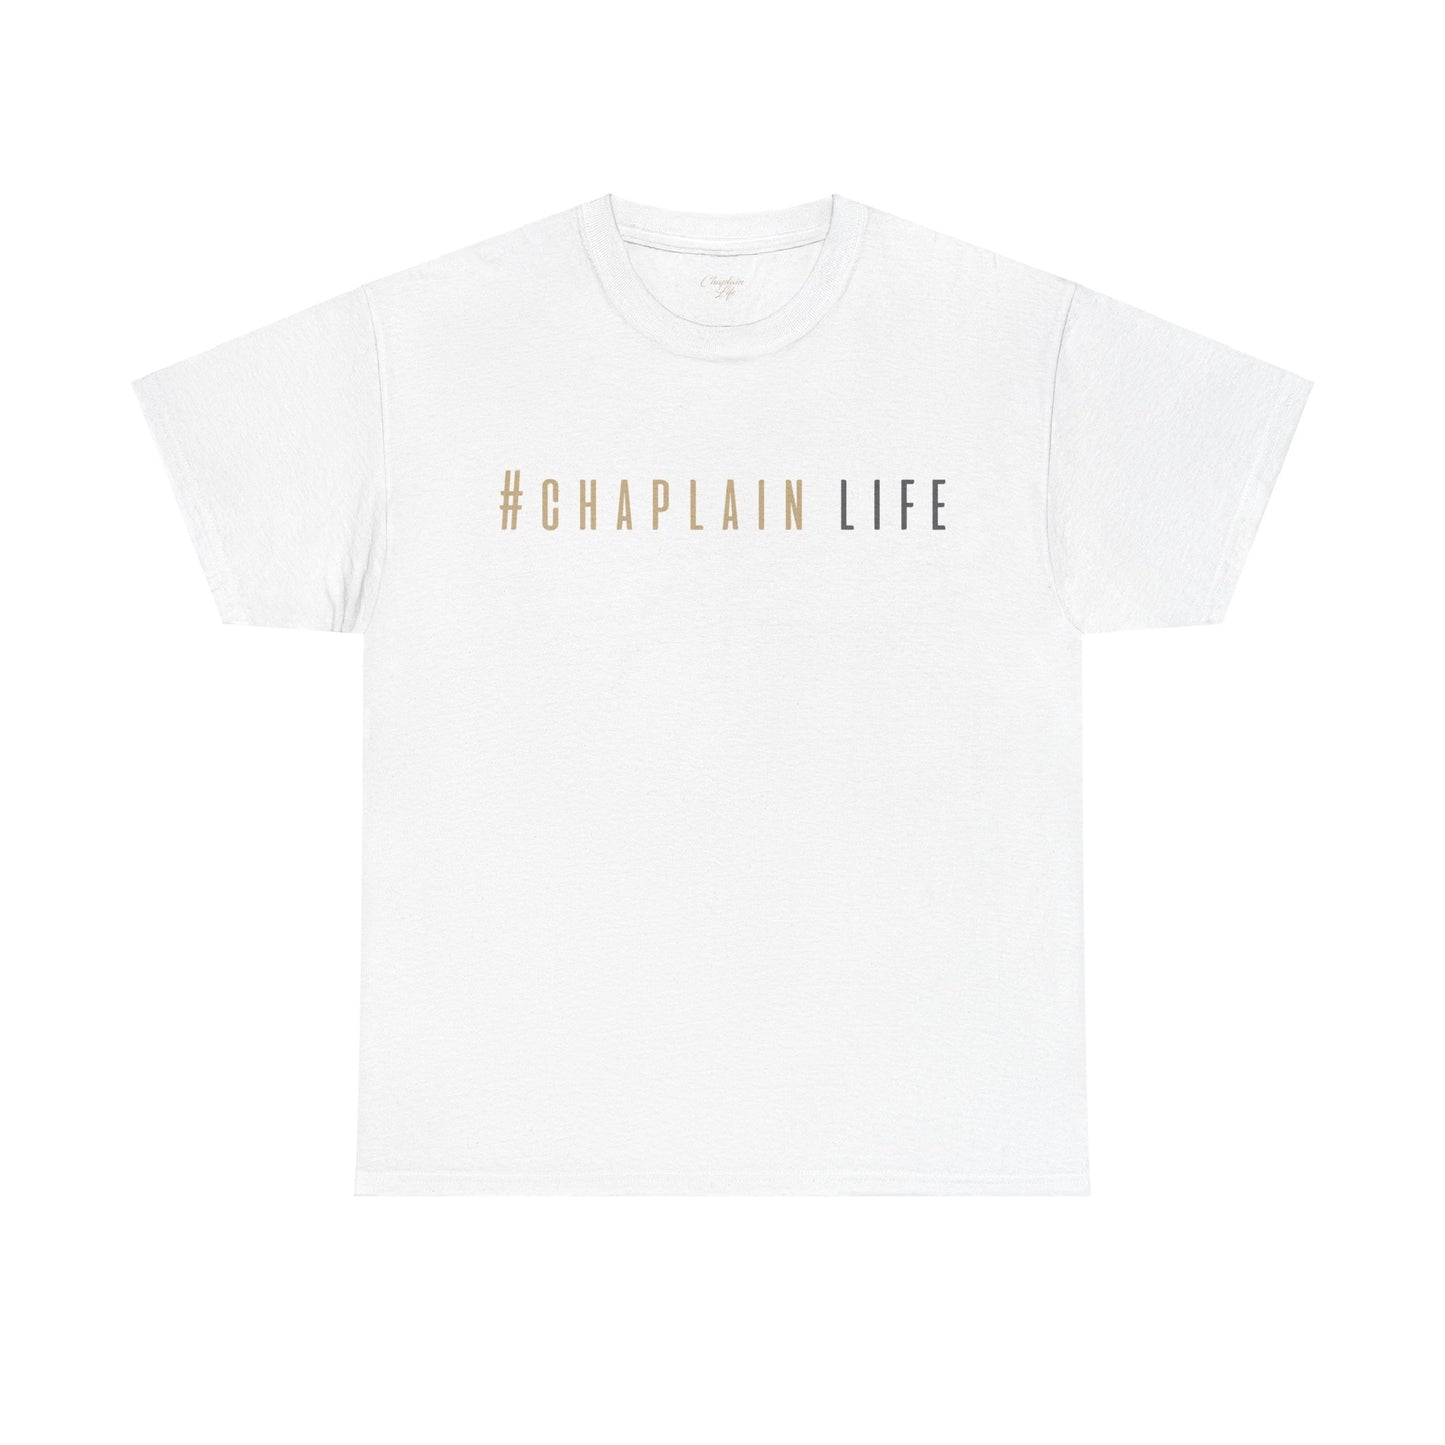 #Chaplain Life two colors  by Chaplain Life®